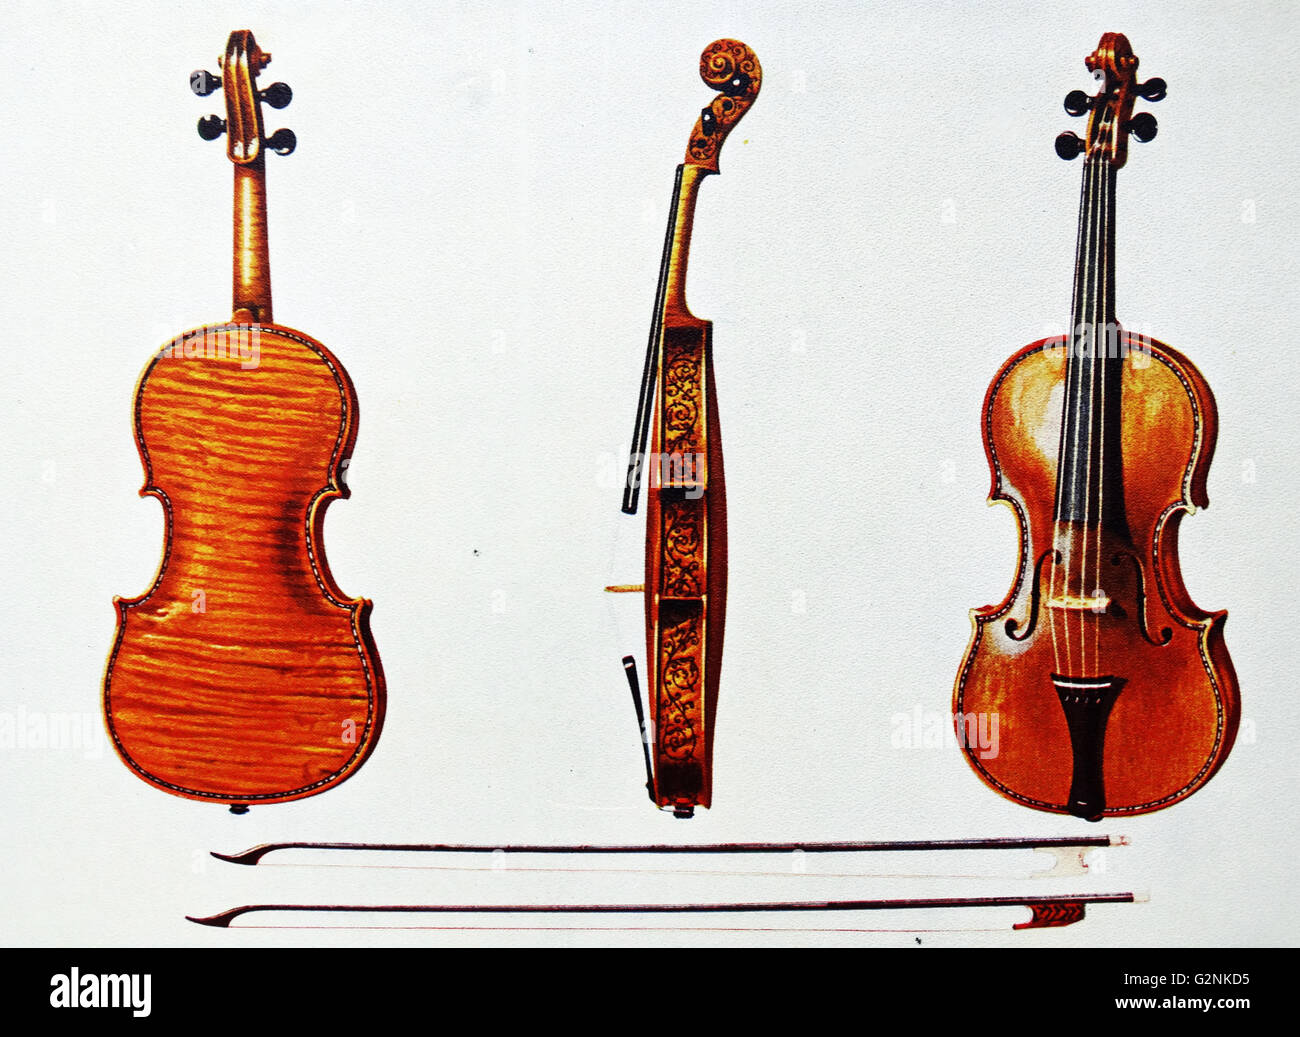 Violin, The Hellier Stradivarius and two old bows noted for the fluting. The 'Hellier' Stradivarius Violin is considered to be one of the perfect earlier works of the instrument. Stock Photo